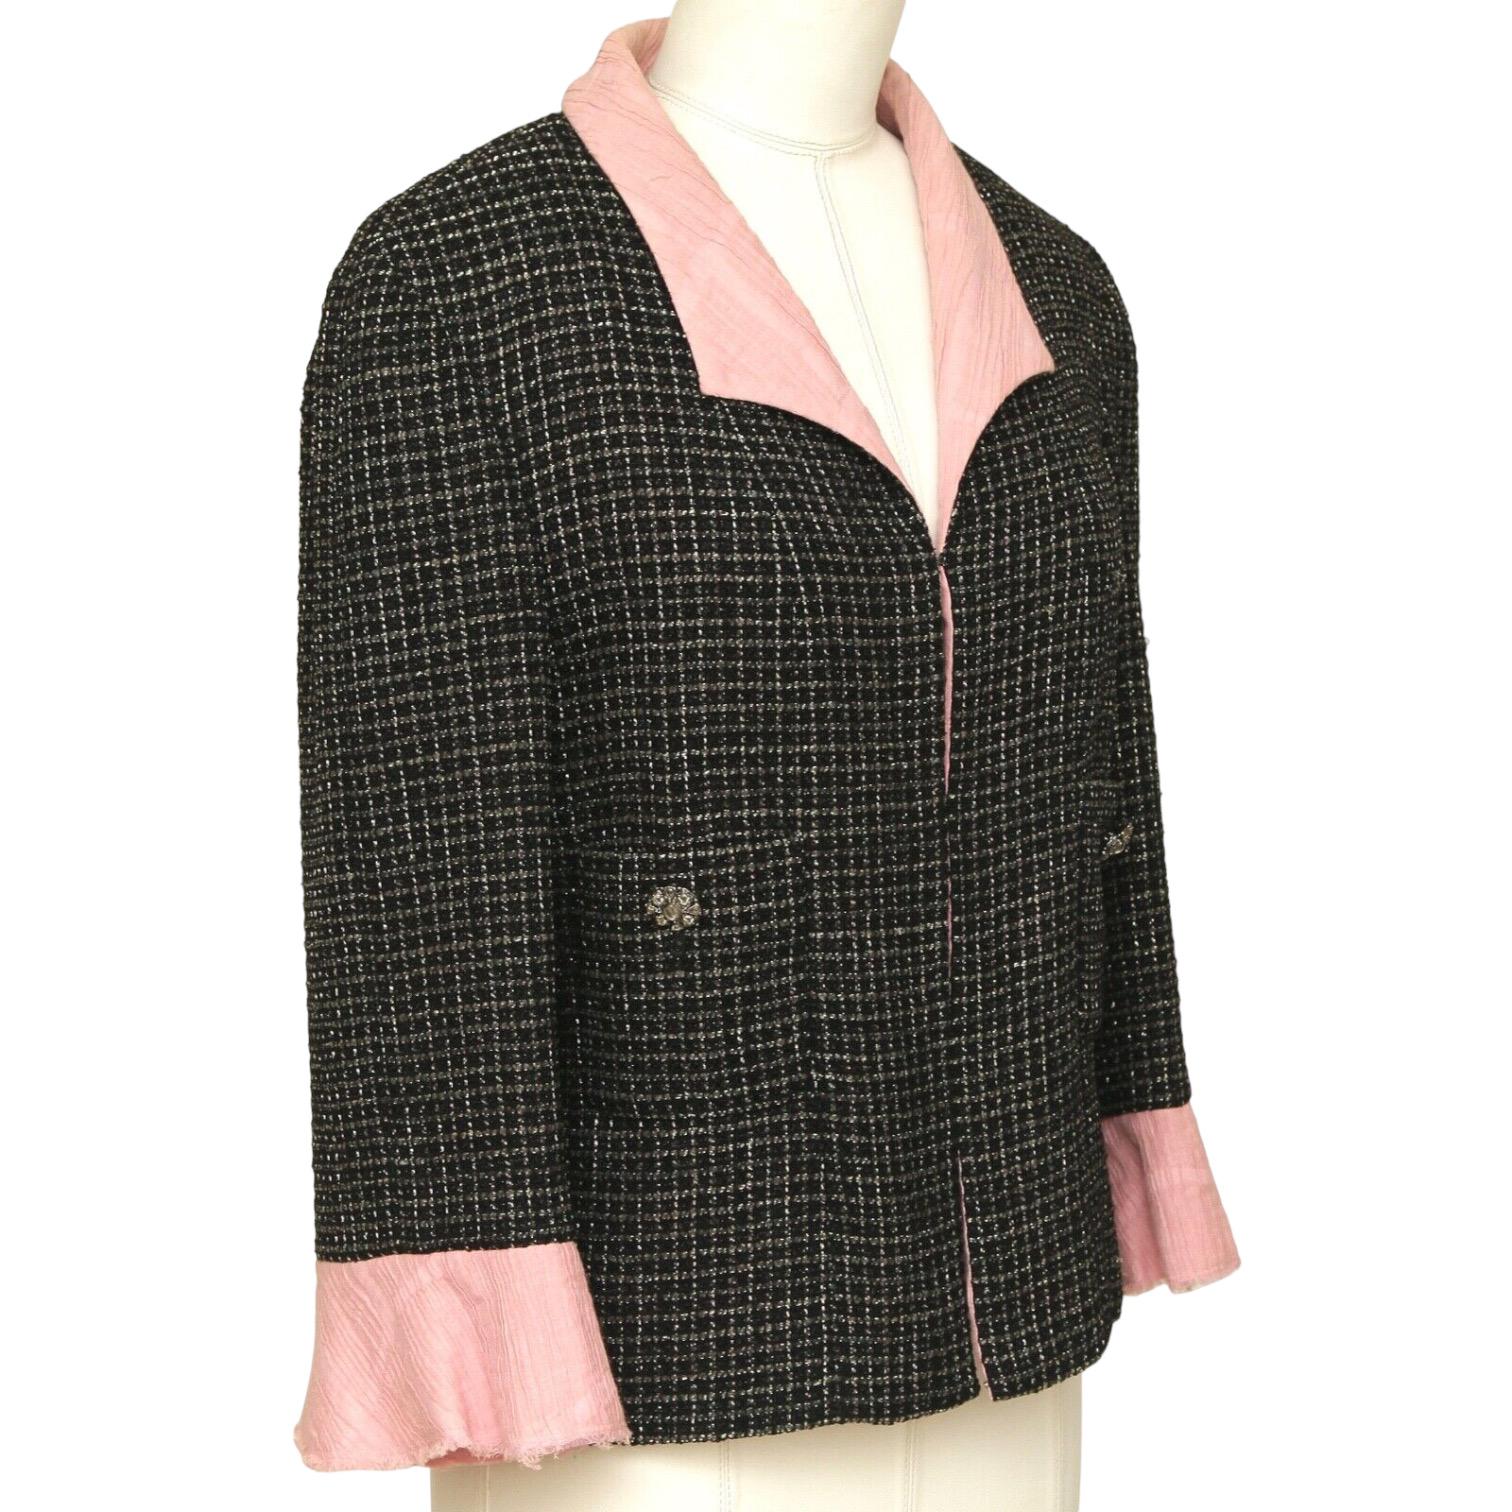 GUARANTEED AUTHENTIC CHANEL 2012 COLLECTION IRIDESCENT BLACK TWEED JACKET

Matching Skirt Available For Sale In A Separate Listing.

Design:
- Black iridescent tweed jacket from the 2012 collection.
- Pink collar, cuffs and lining.
- 3/4 sleeve.
-